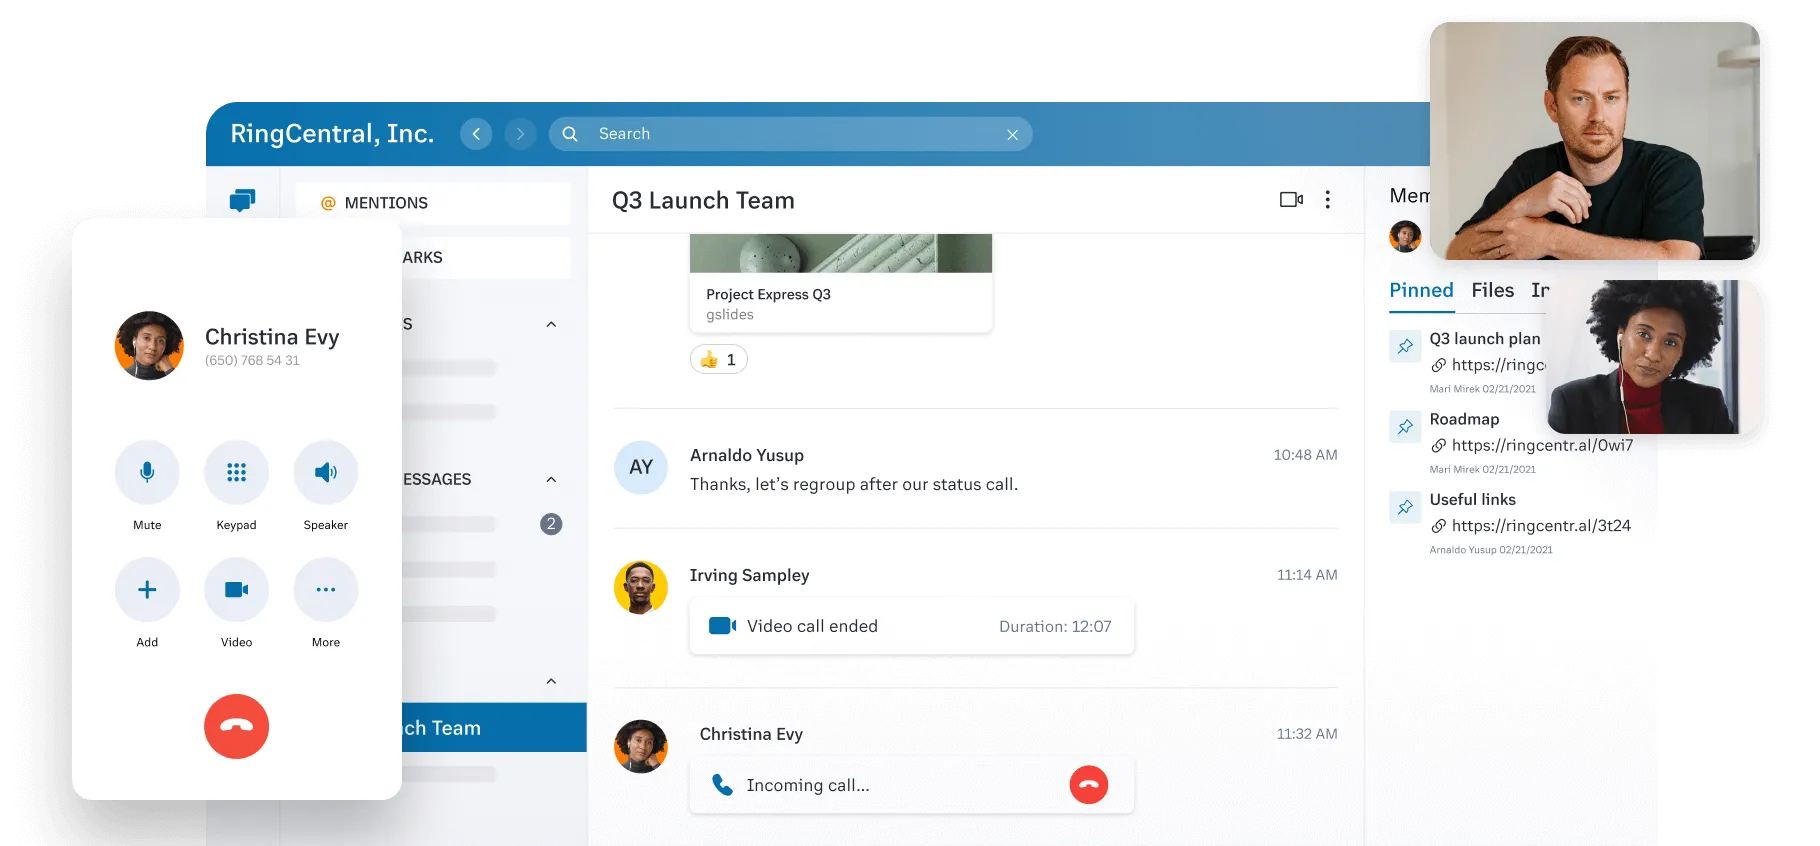 RingCentral Support  Voice, Video, and Messaging Solutions